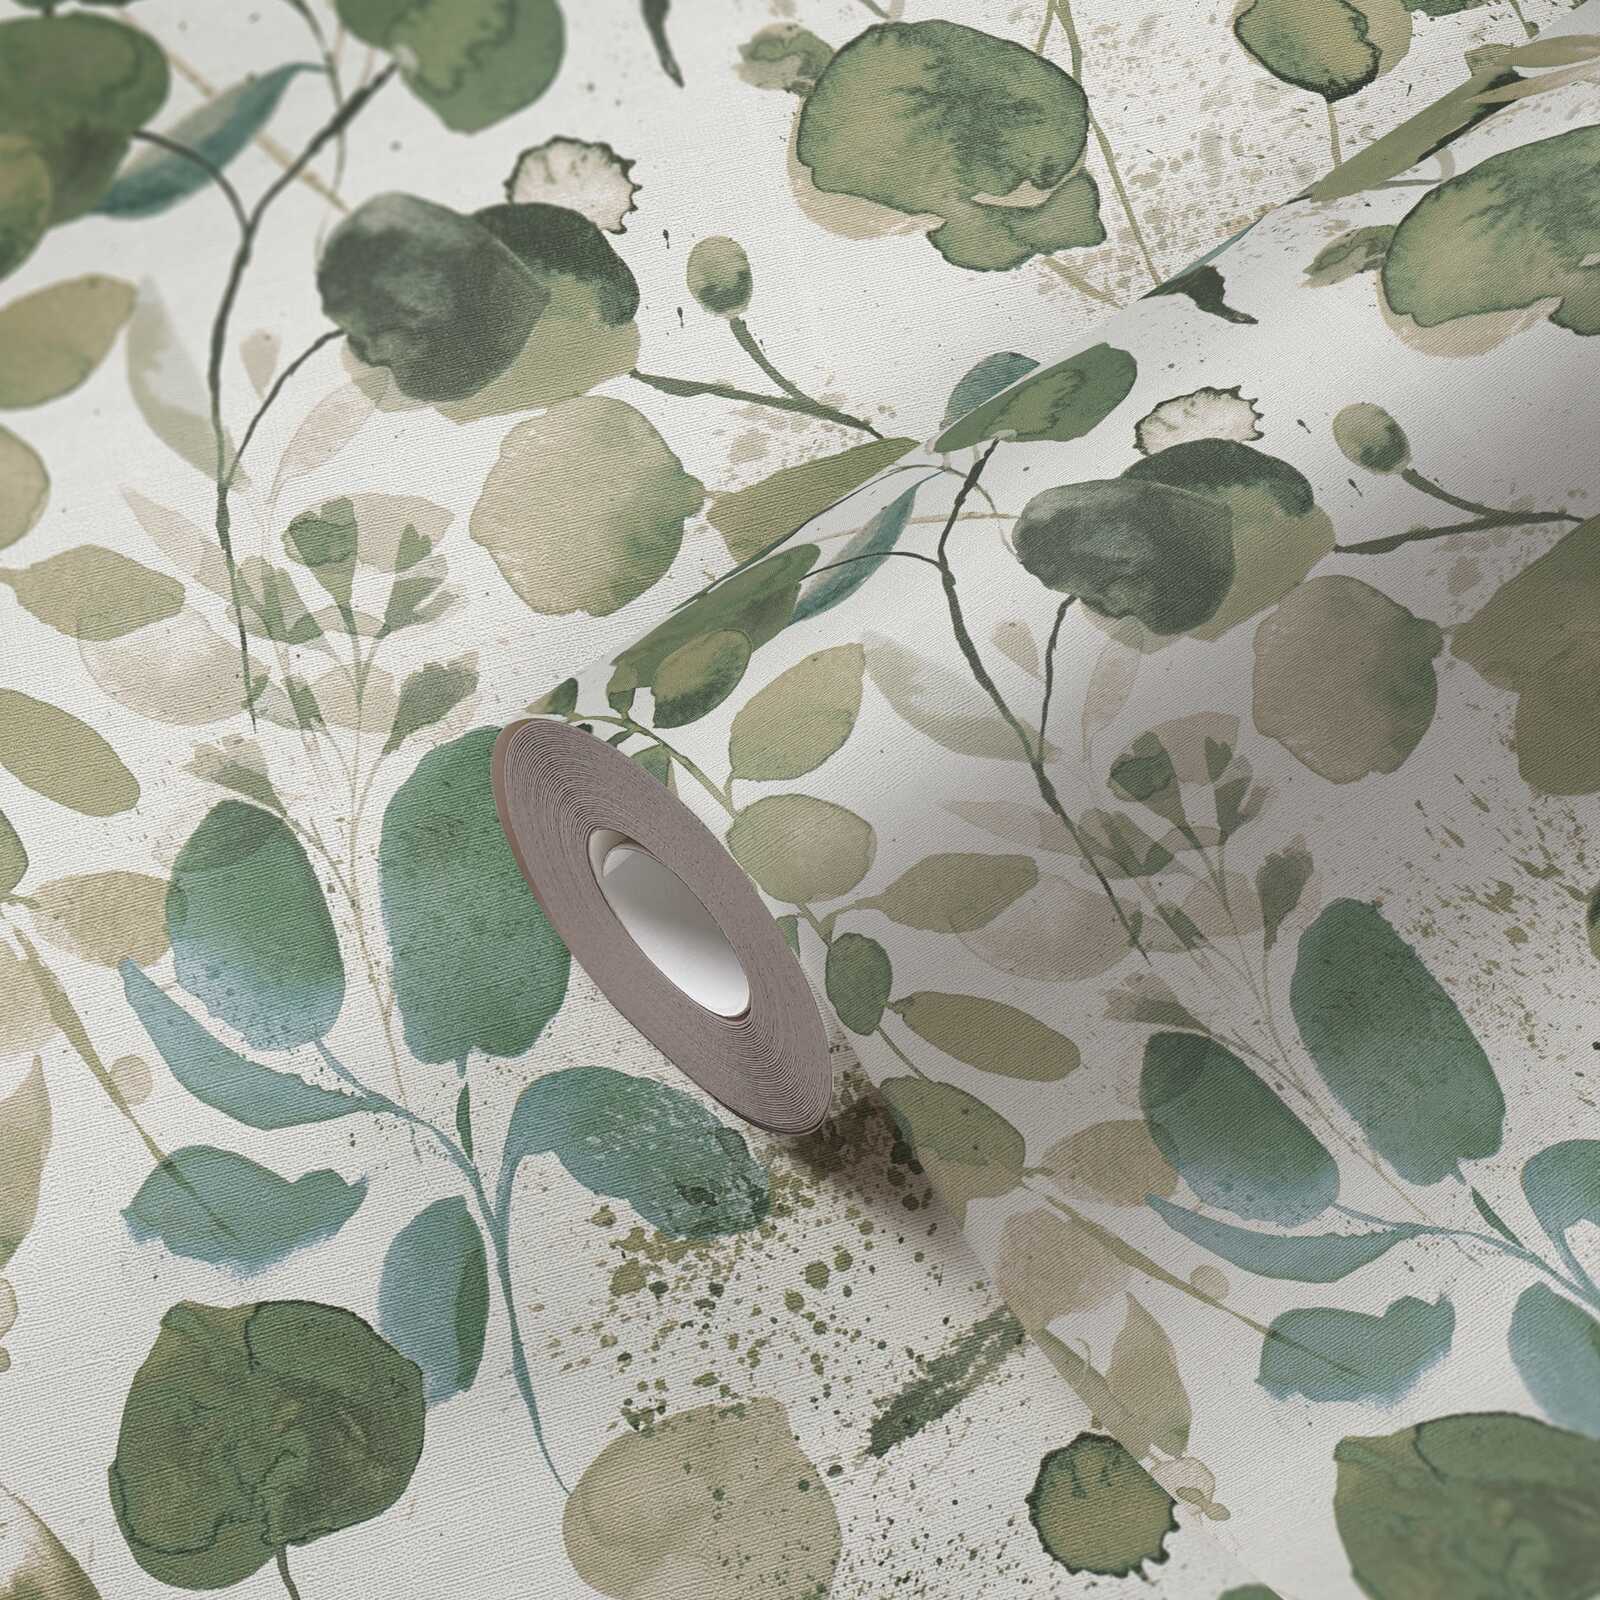             Non-woven wallpaper leaf motif with splashes of colour accents - green, blue, white
        